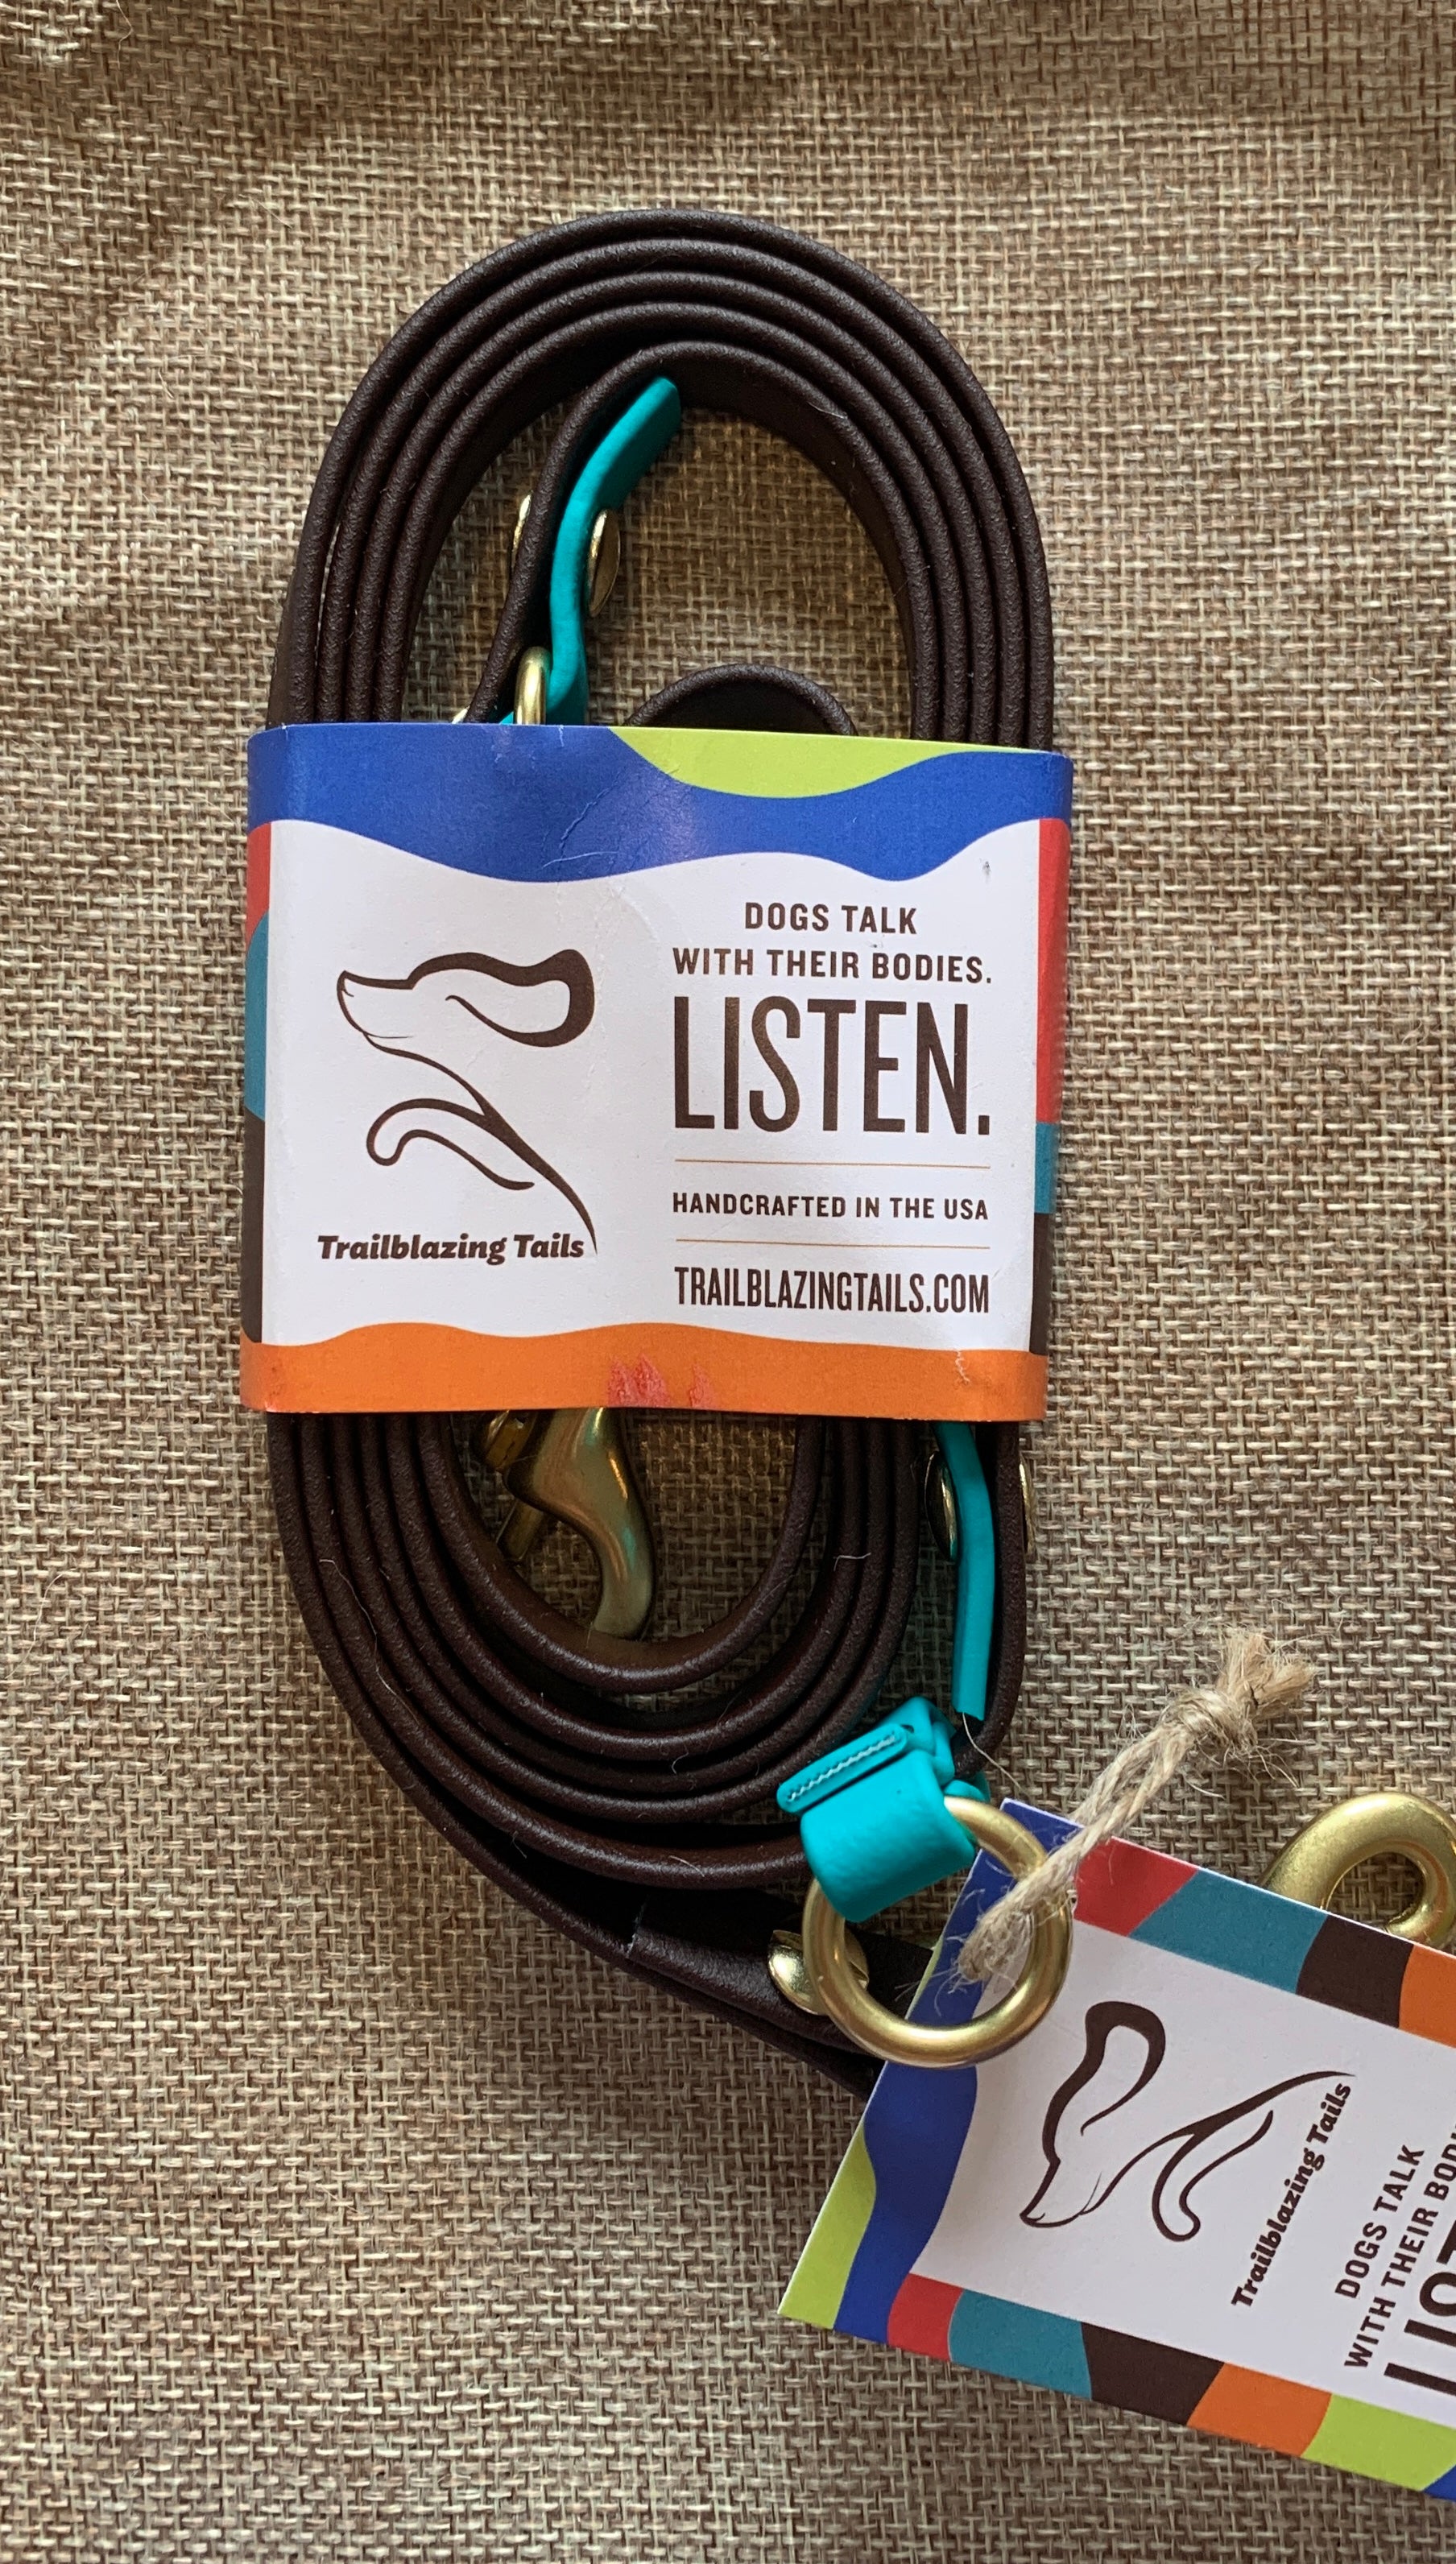 A multifunctional dog leash, Trailblazing Tails: The Sunny, with an adjustable length and a tag that says listen from the brand Your Whole Dog.